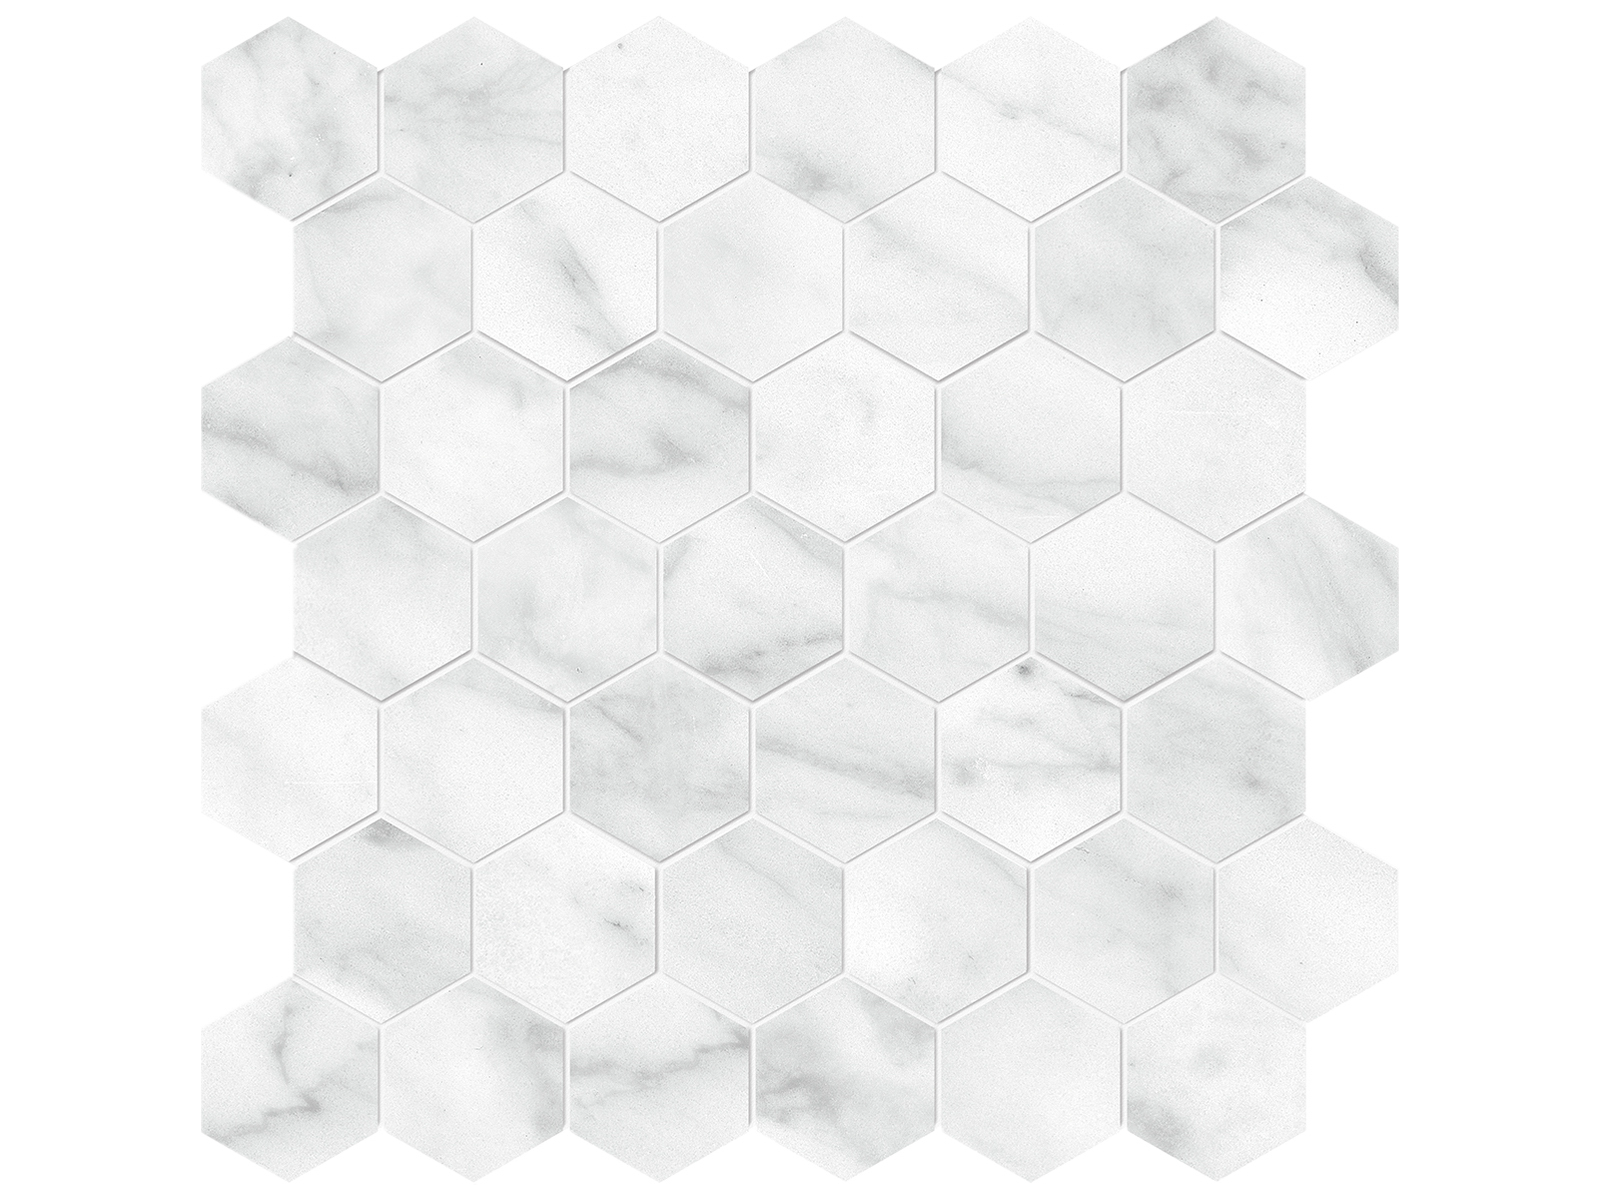 carrara abisso hexagon 2-inch pattern glazed porcelain mosaic from plata anatolia collection distributed by surface group international polished finish rectified edge mesh shape